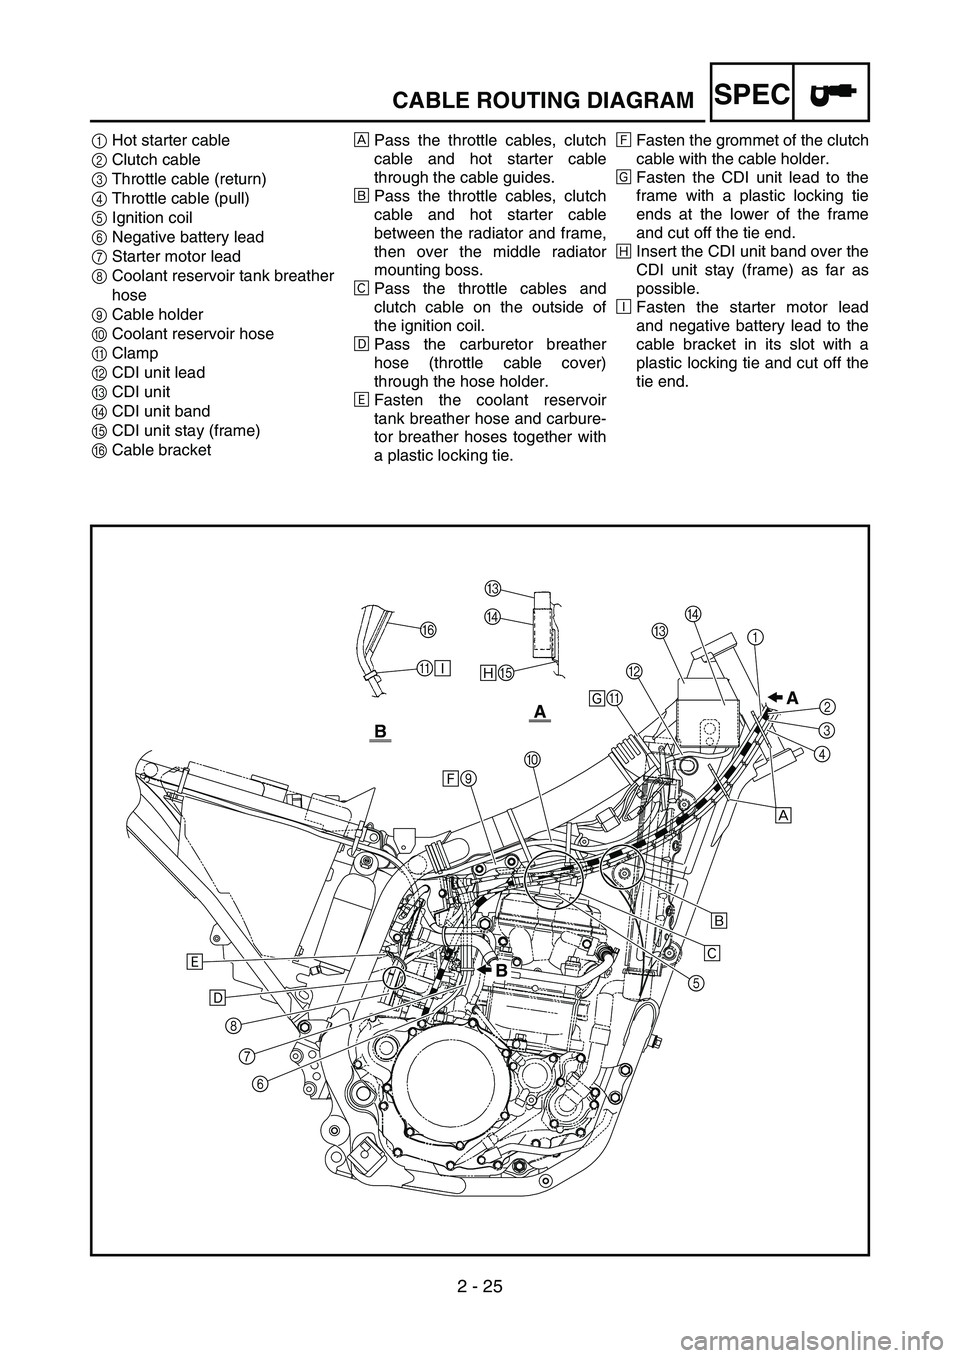 YAMAHA WR 450F 2005  Betriebsanleitungen (in German) 2 - 25
SPECCABLE ROUTING DIAGRAM
1Hot starter cable
2Clutch cable
3Throttle cable (return)
4Throttle cable (pull)
5Ignition coil
6Negative battery lead
7Starter motor lead
8Coolant reservoir tank brea